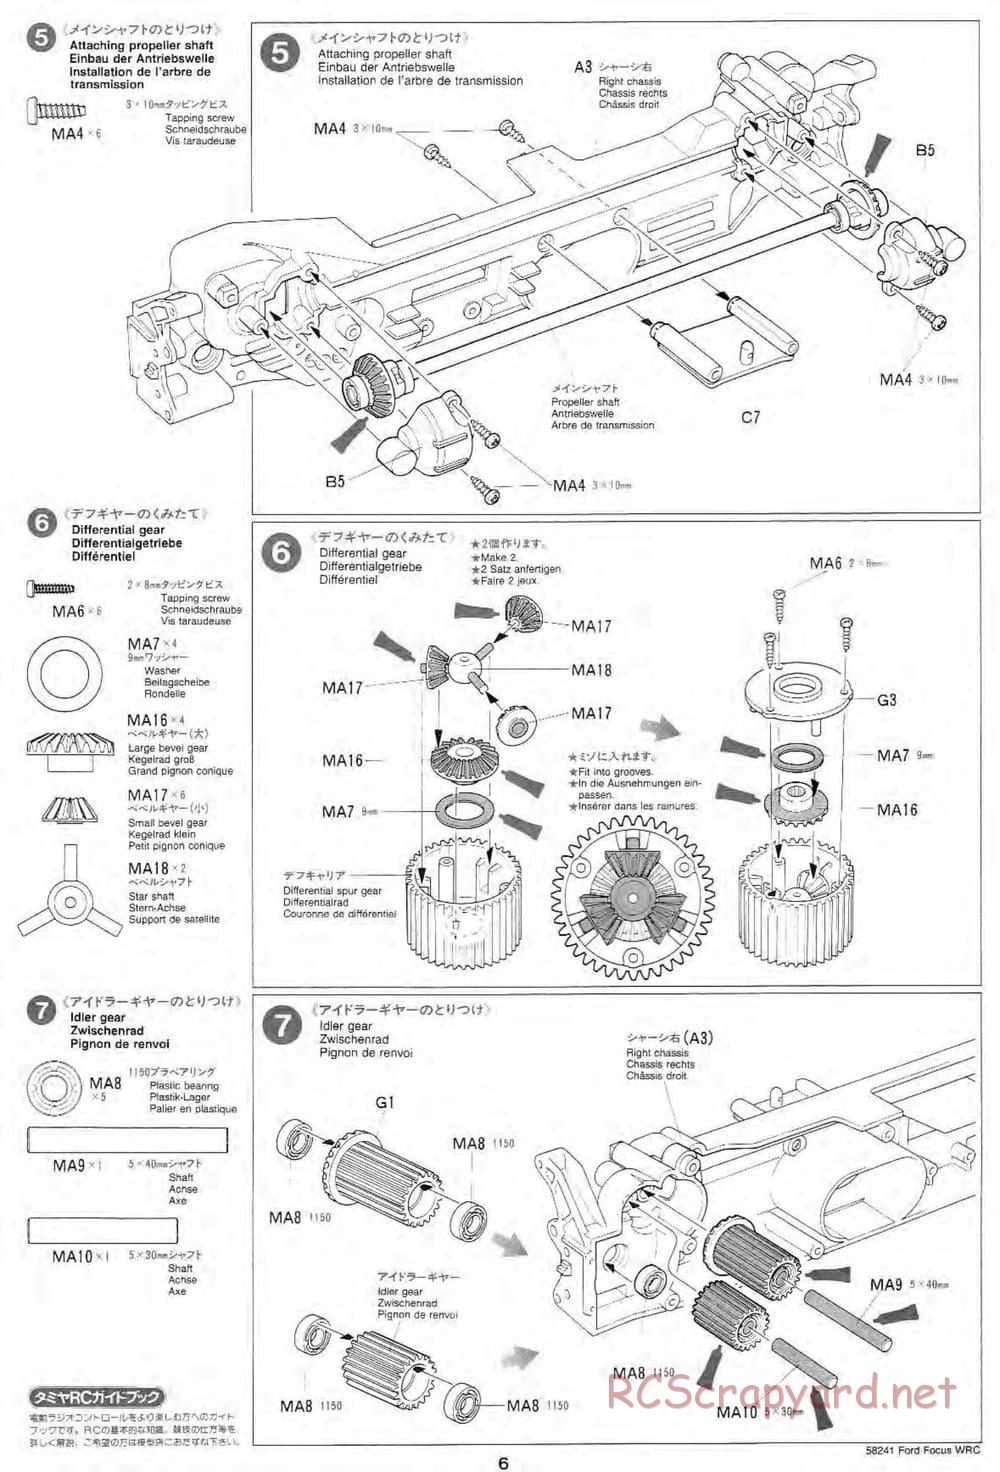 Tamiya - Ford Focus WRC - TL-01 Chassis - Manual - Page 6